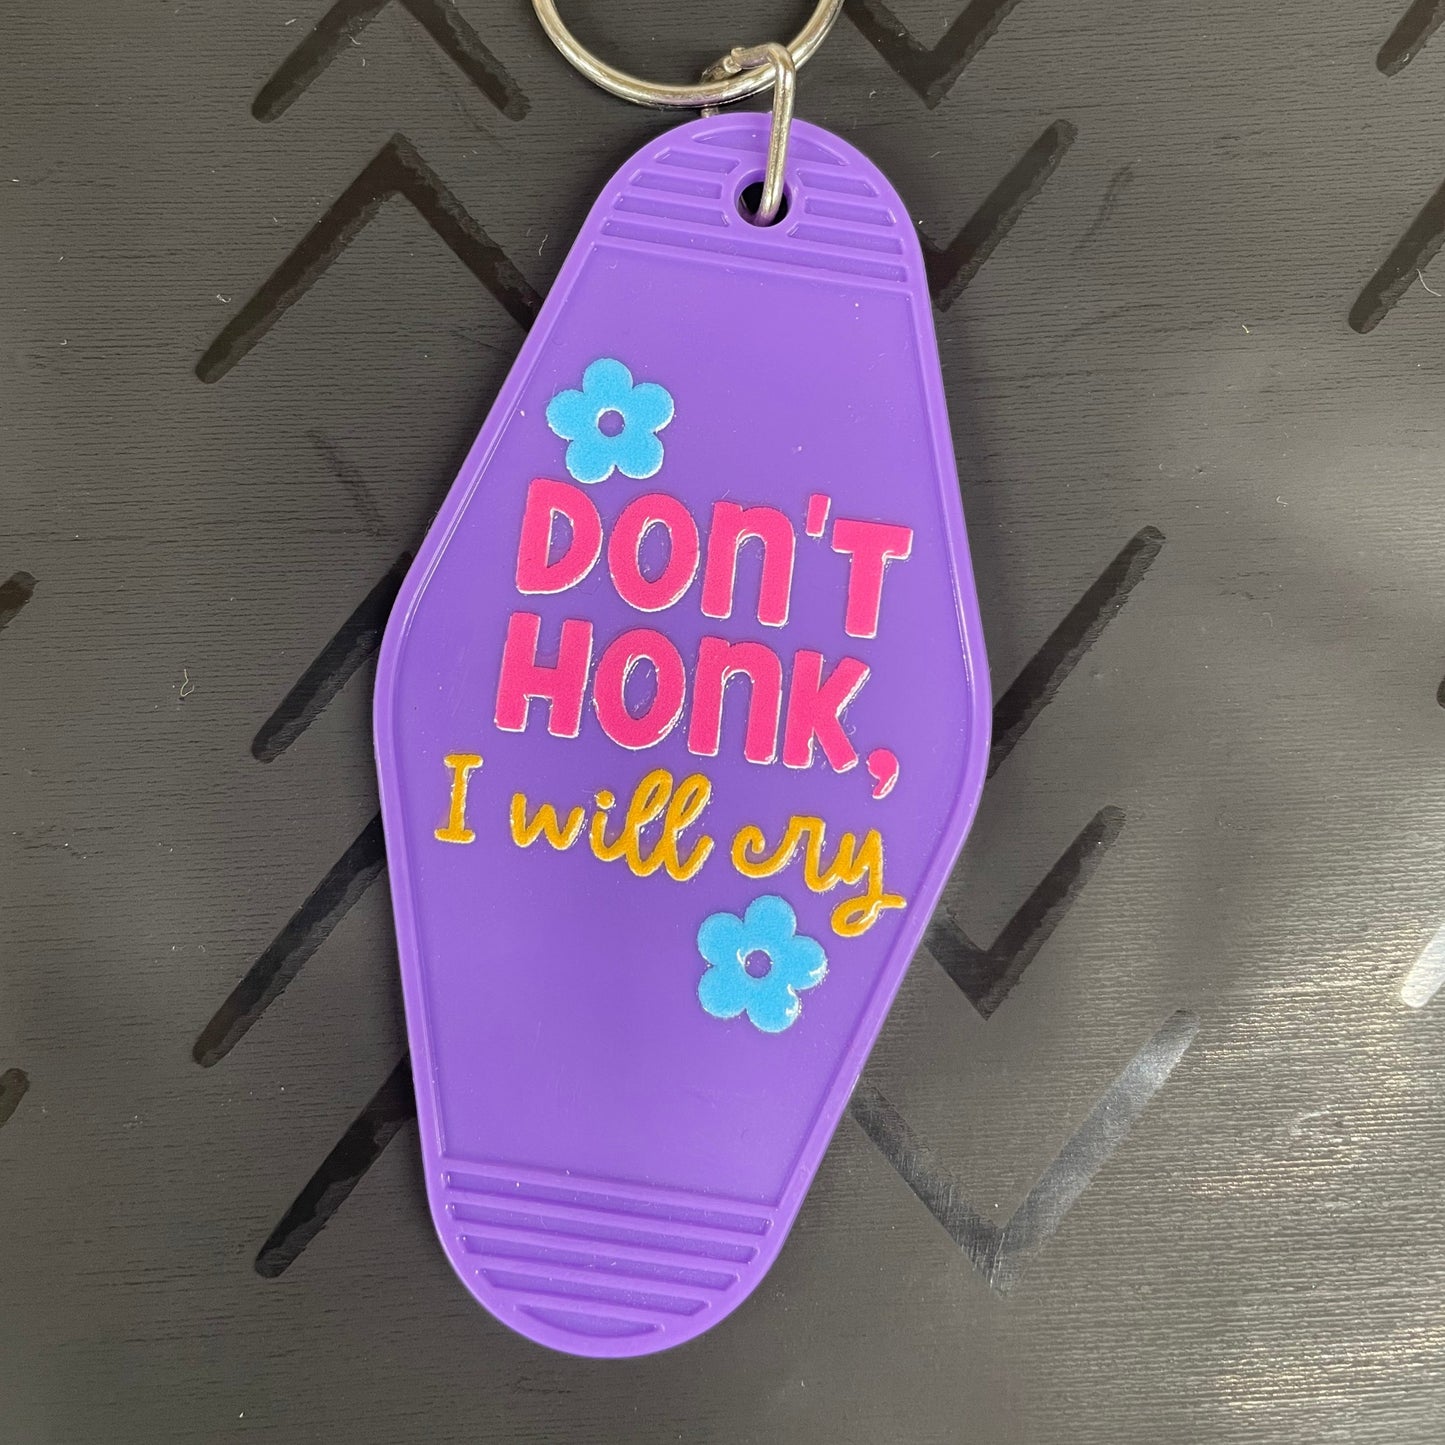 Don't Honk, I Will Cry Keychain